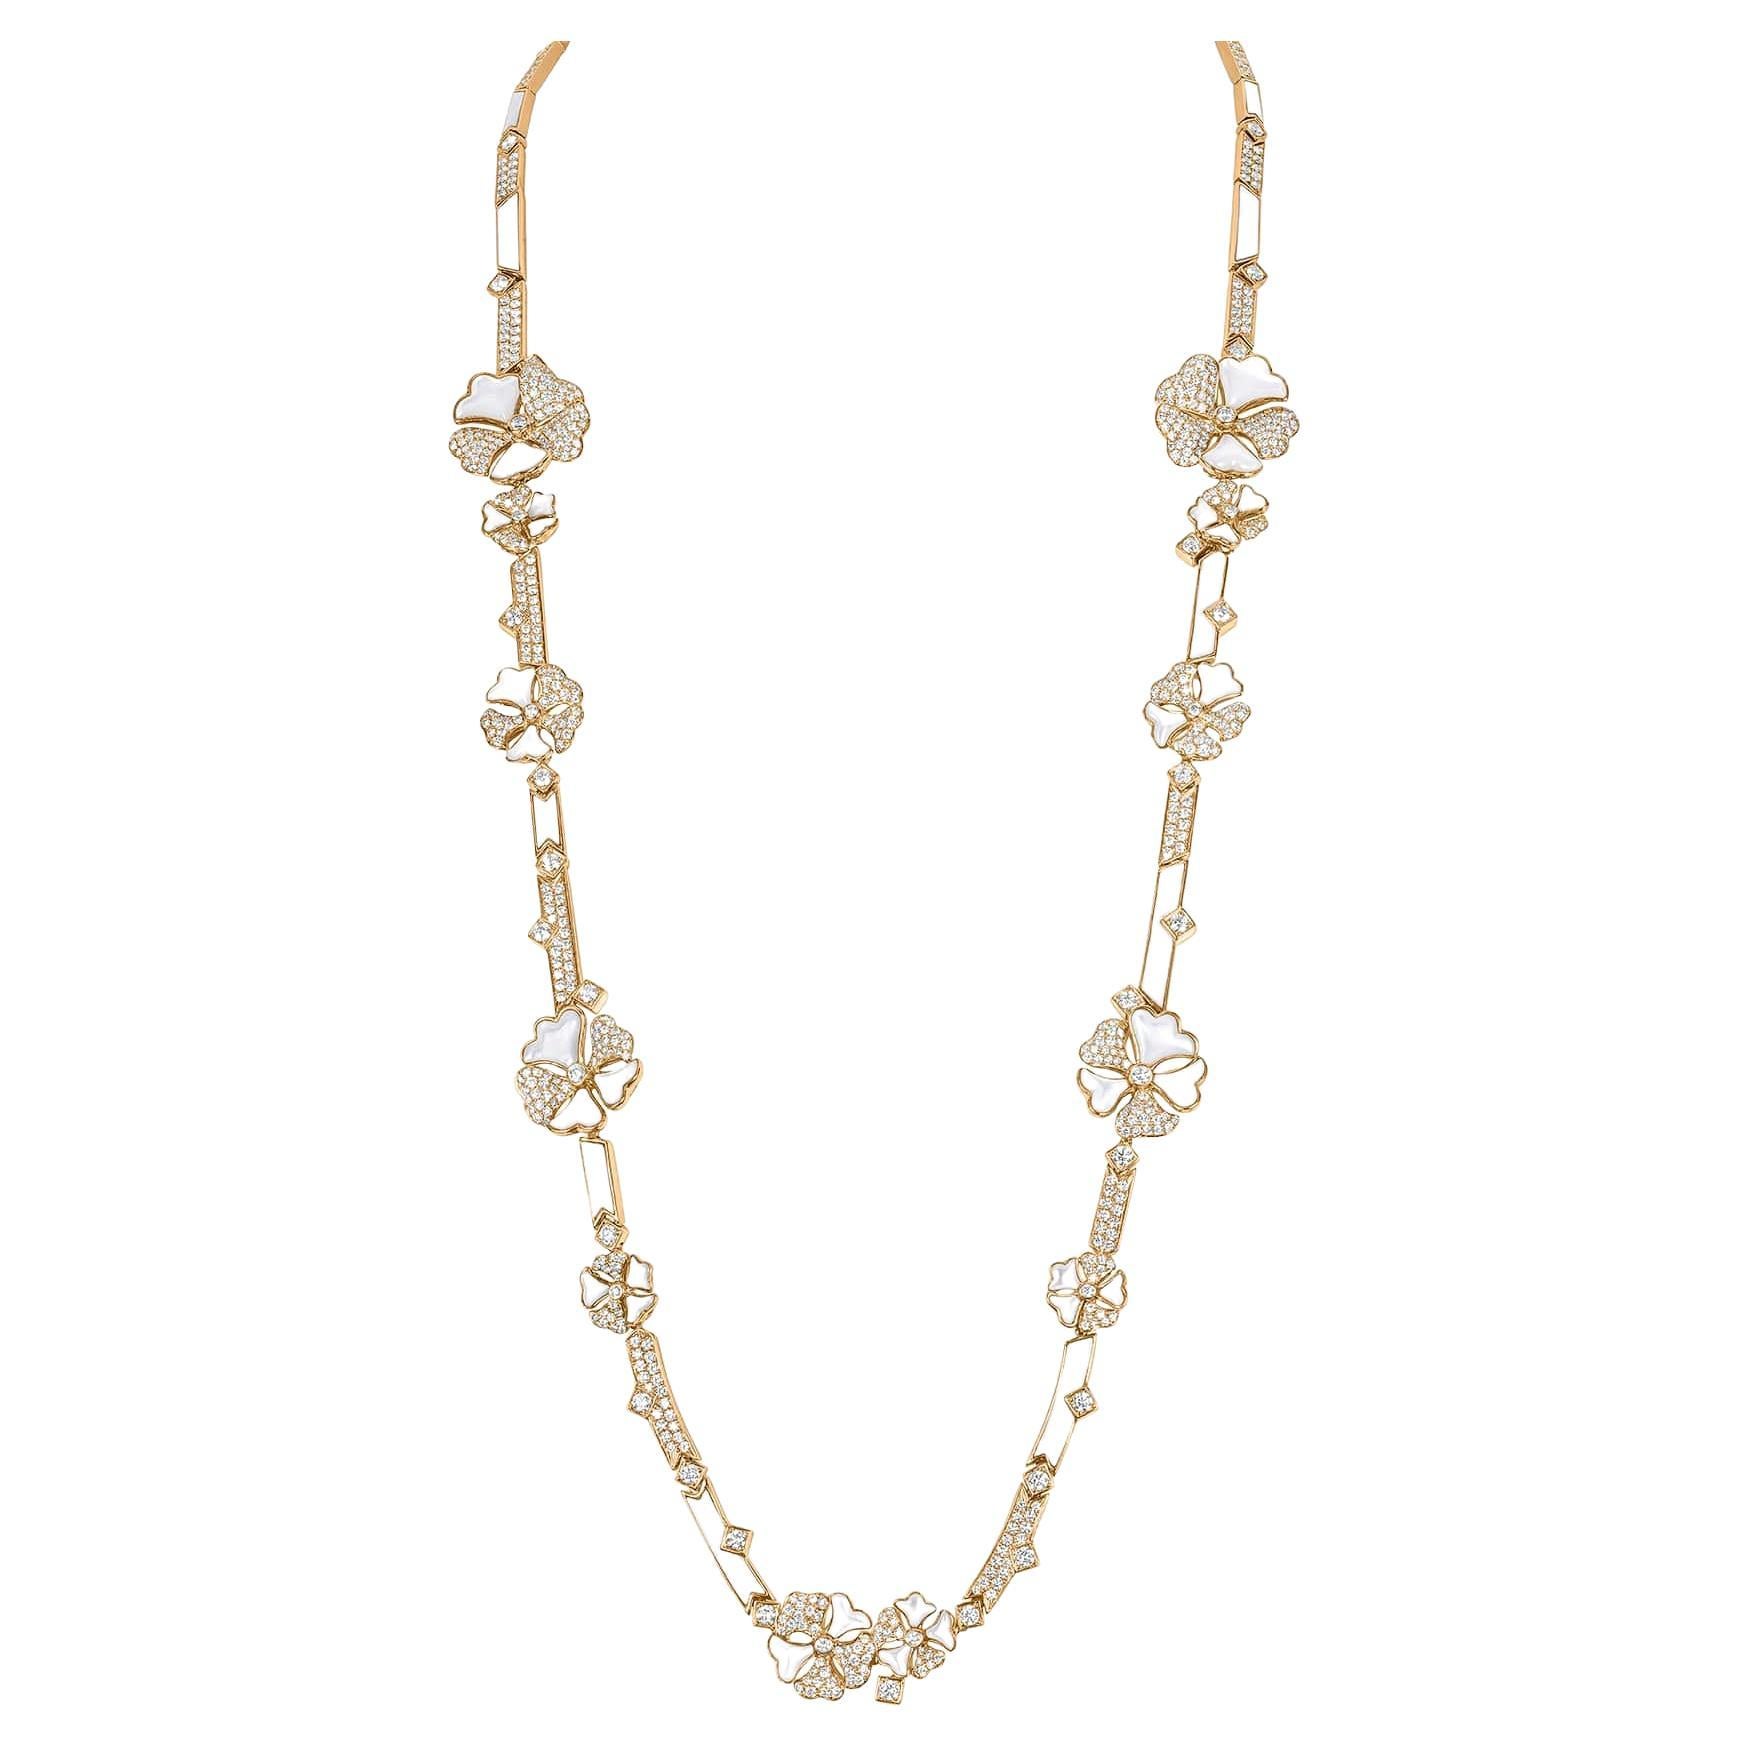 Bloom Diamond and Mother-of-pearl Long Flower Chain Necklace in 18k Yellow Gold